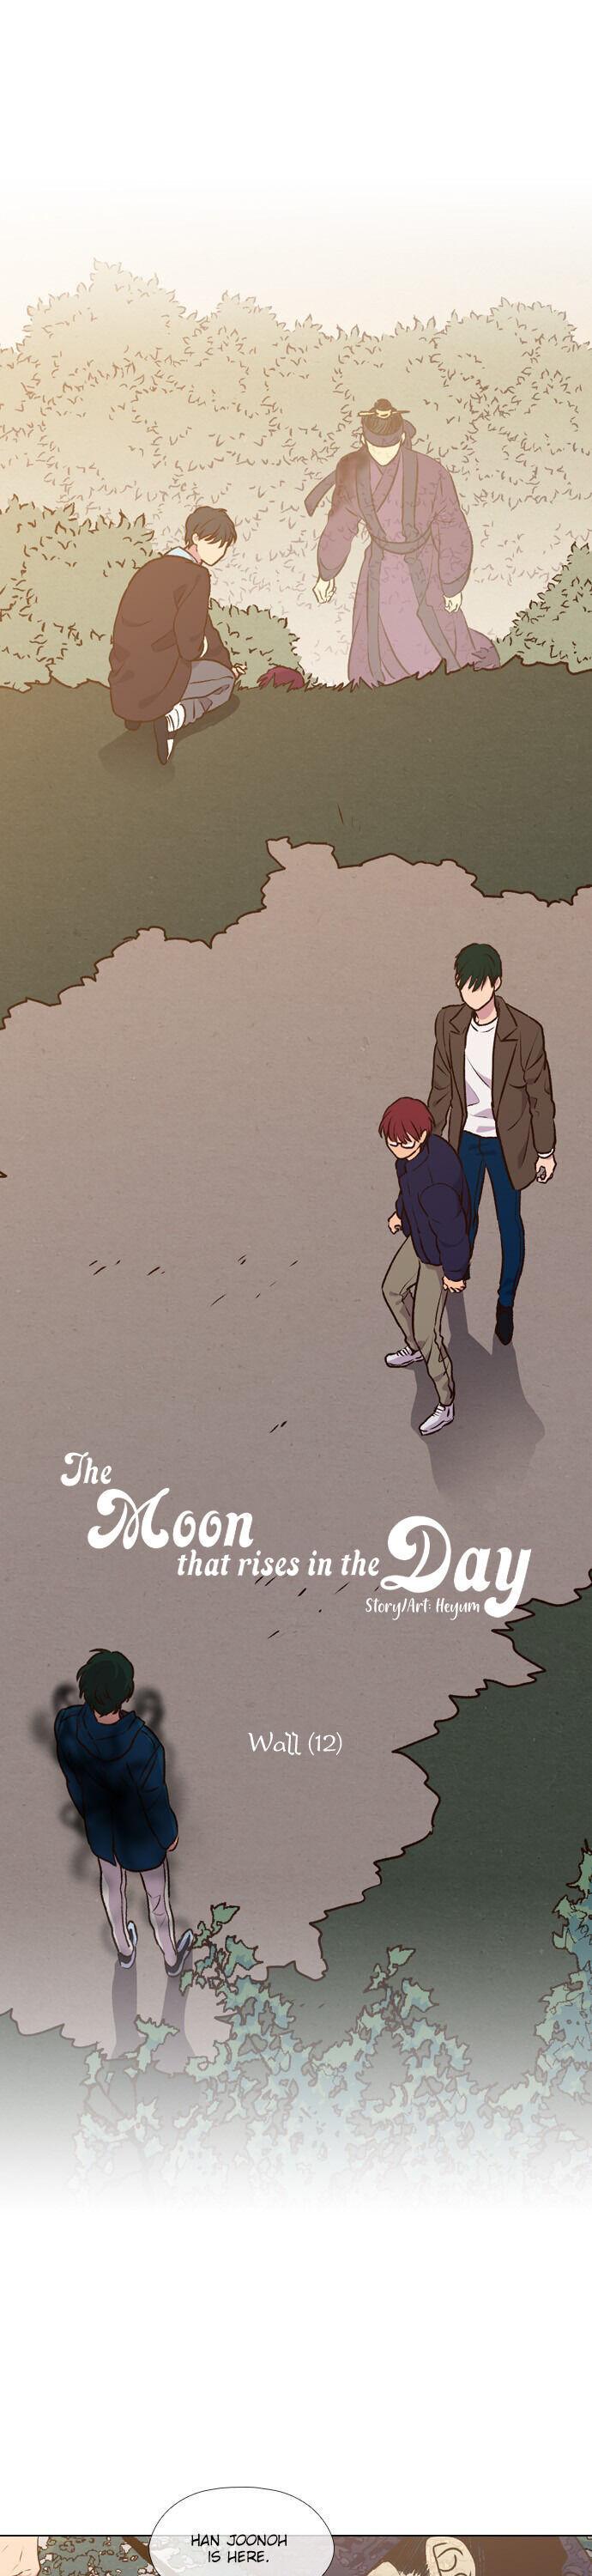 Moonrise During the Day - episode 184 - 0